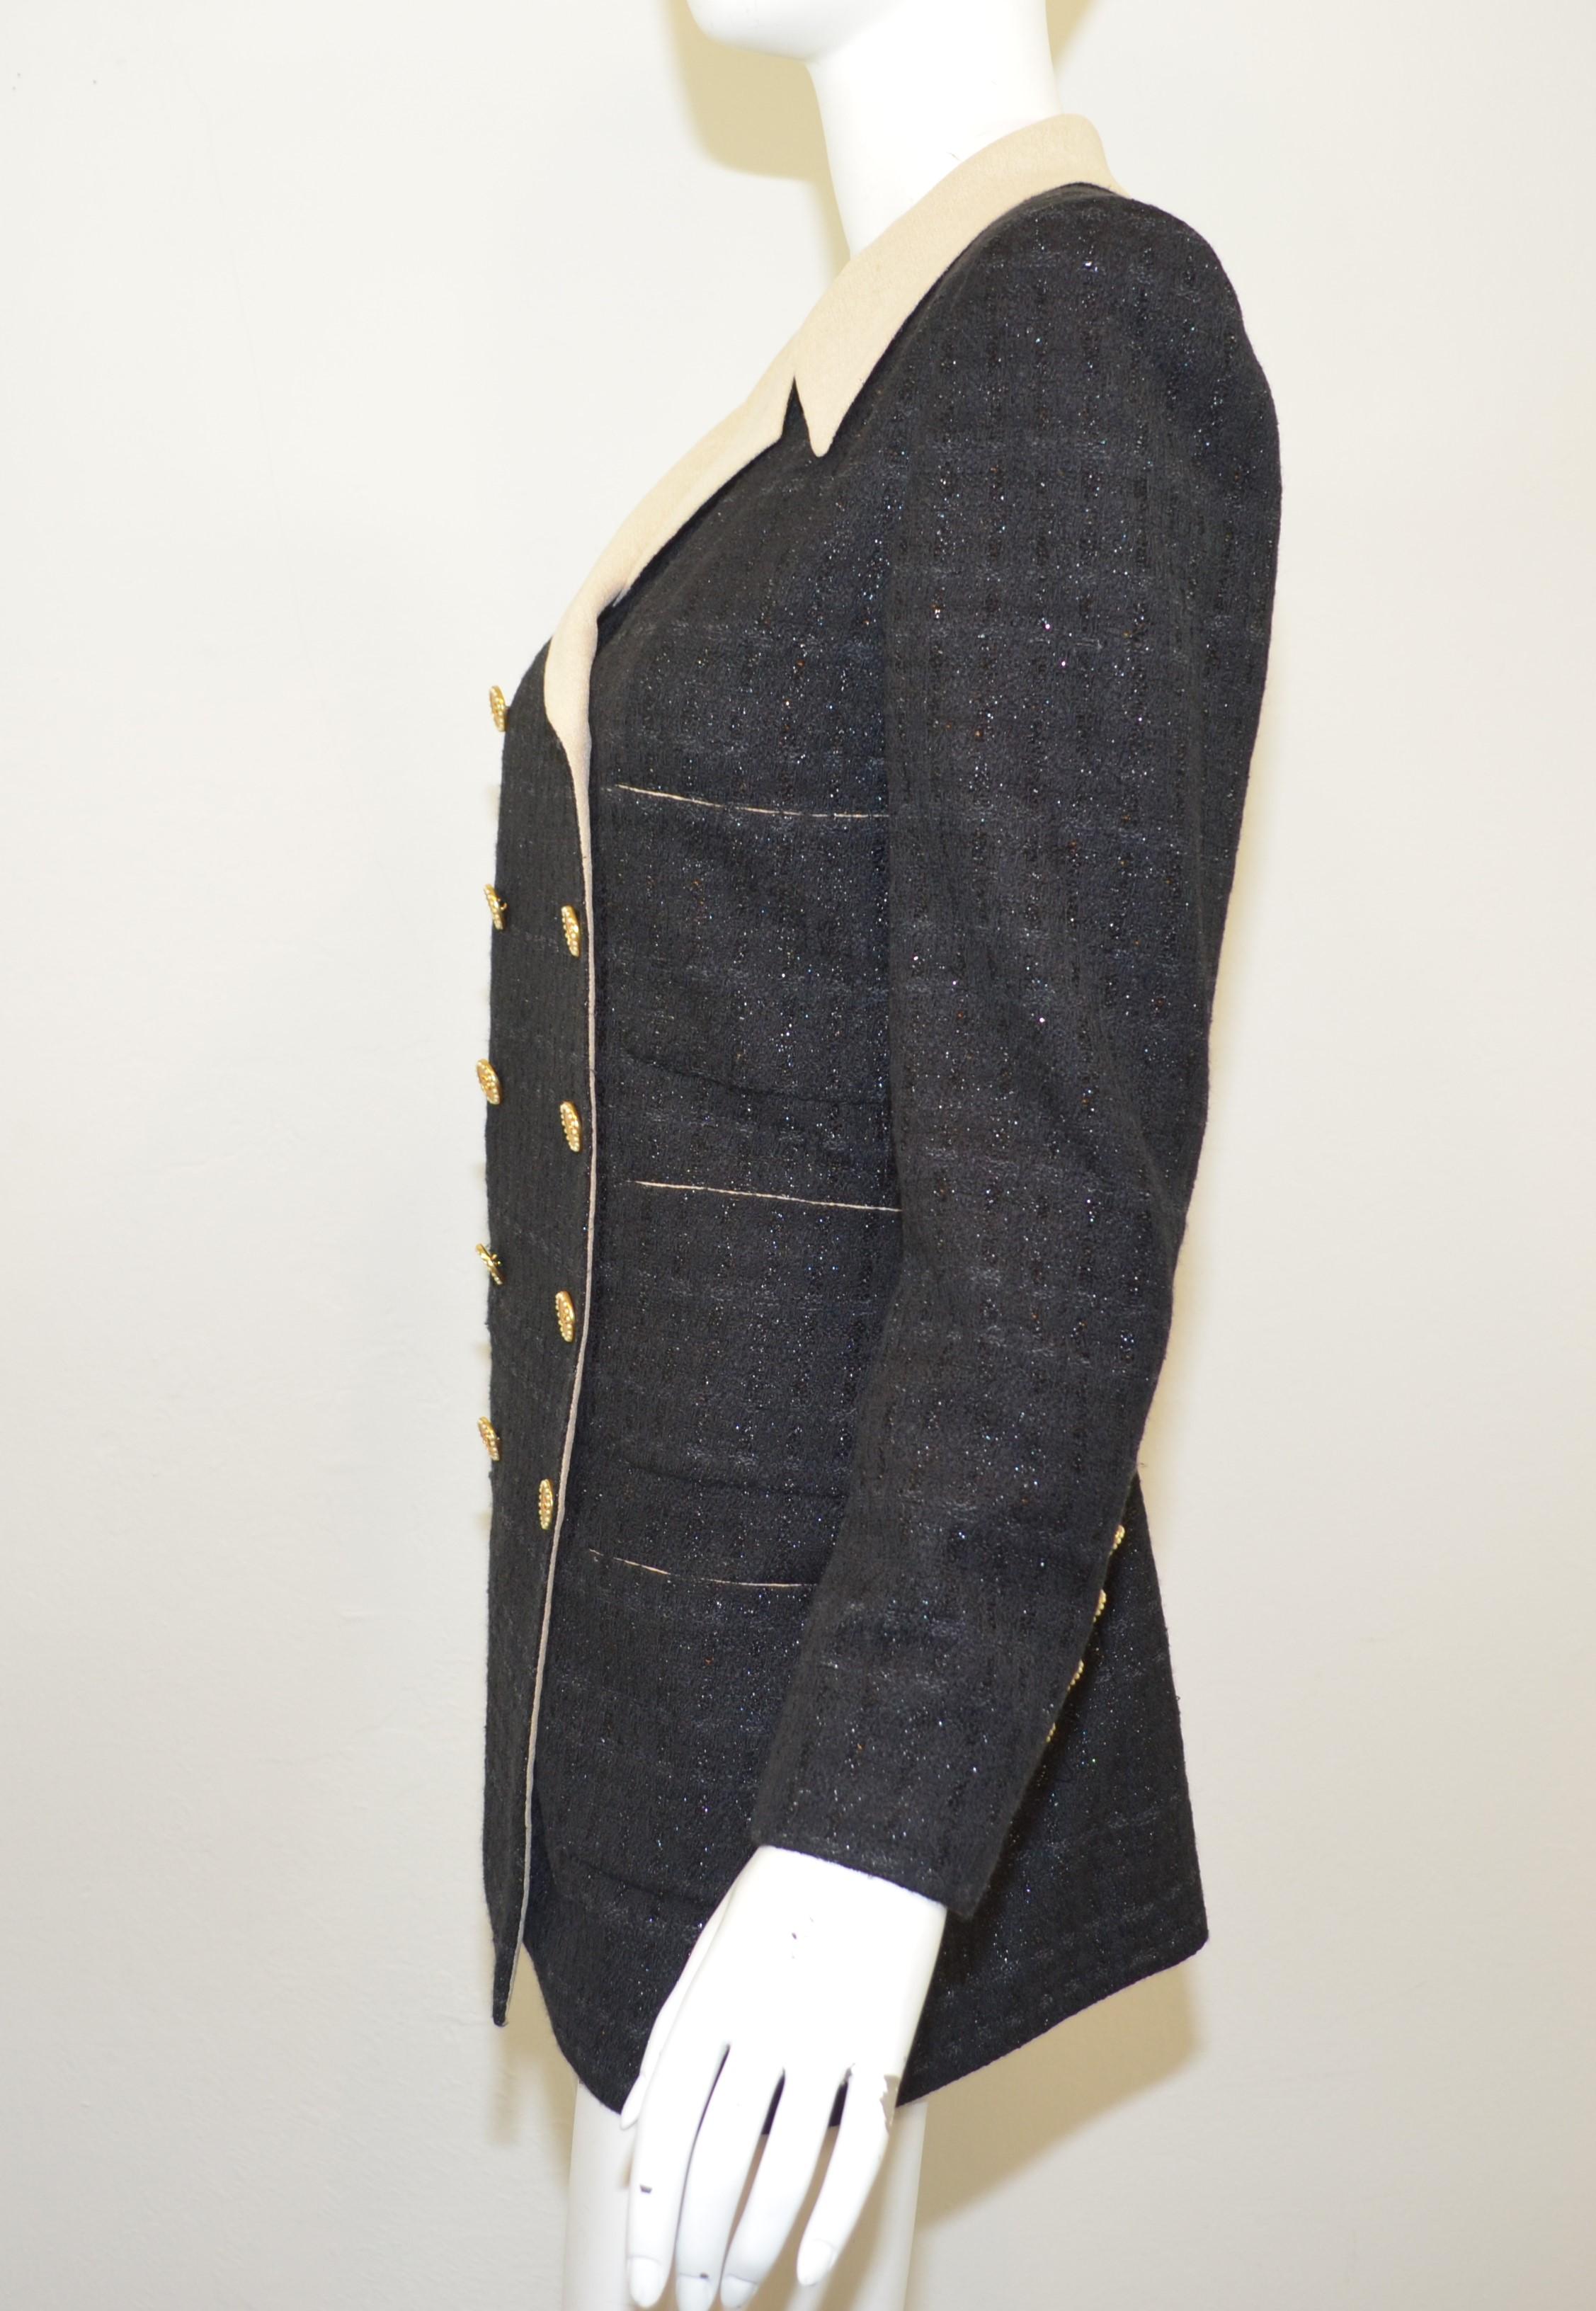 Chanel jacket from 2002 P collection is featured in a dark navy with a shimmered finish and gold-tone buttons encrusted with pearls. Jacket is fully lined and has a total of four patch pockets. Jacket is a size 40, made in France.

Bust 38''
Sleeves